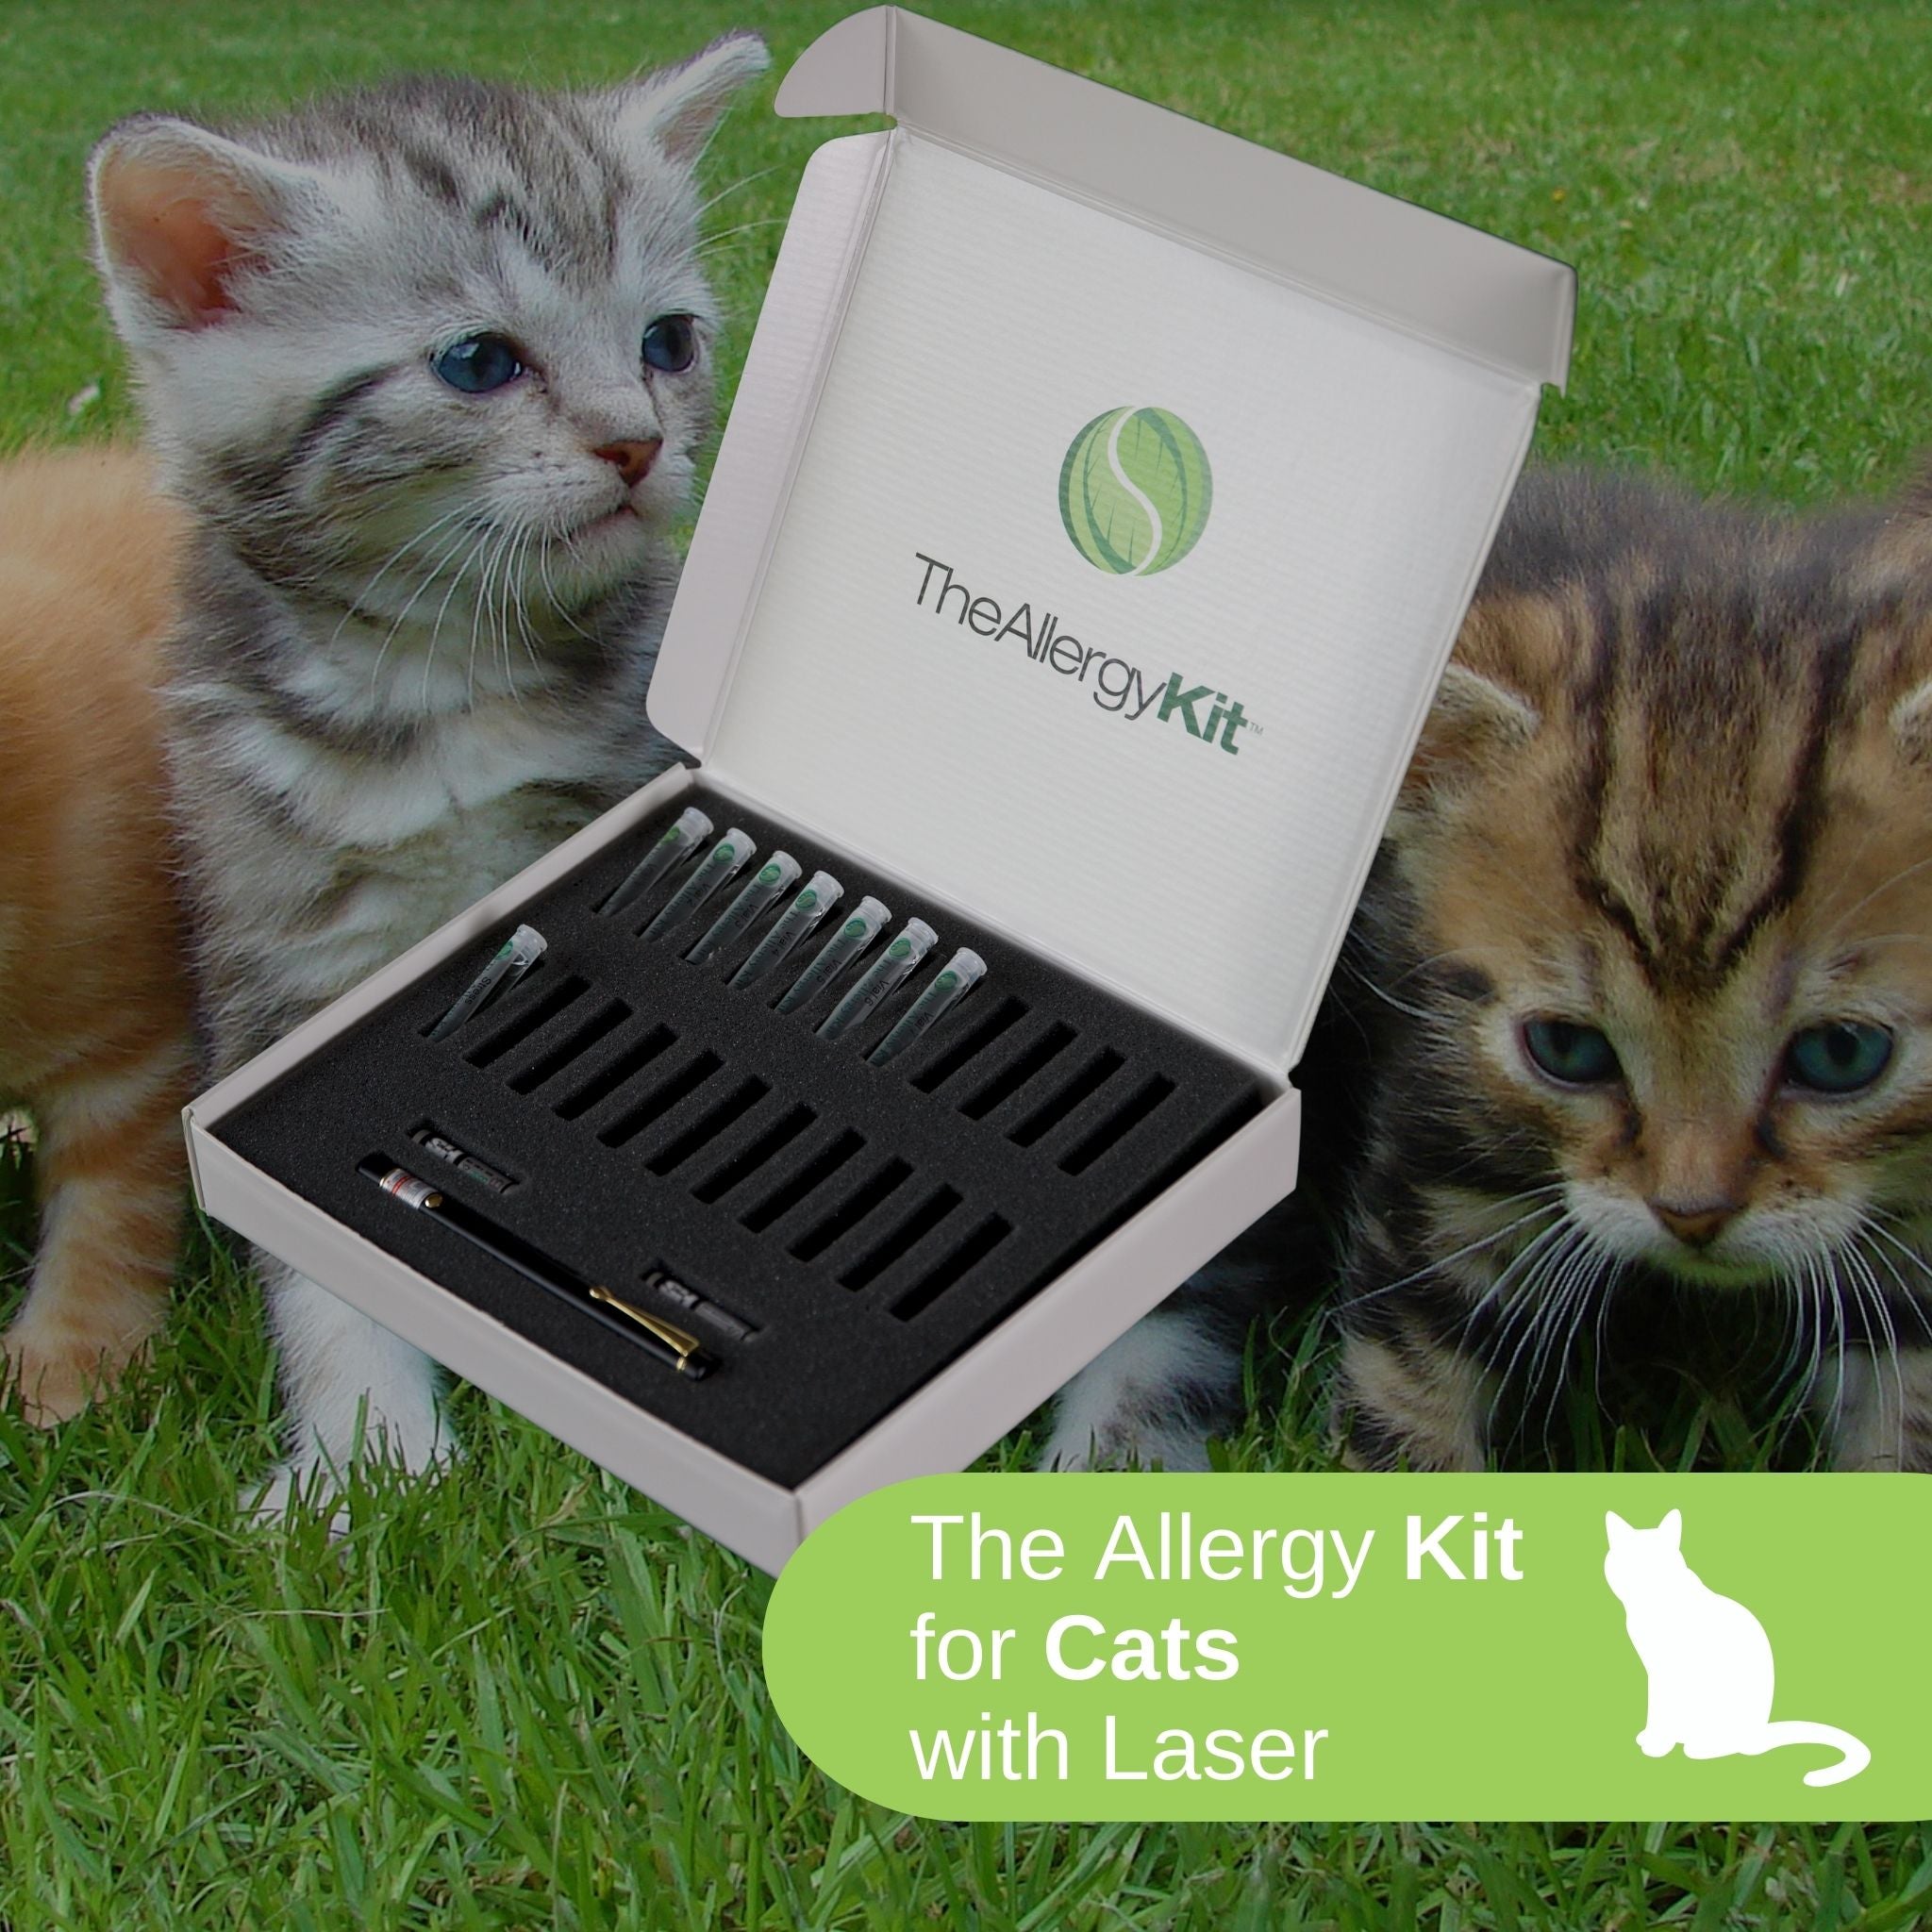 The Allergy Kit for Cats with Laser